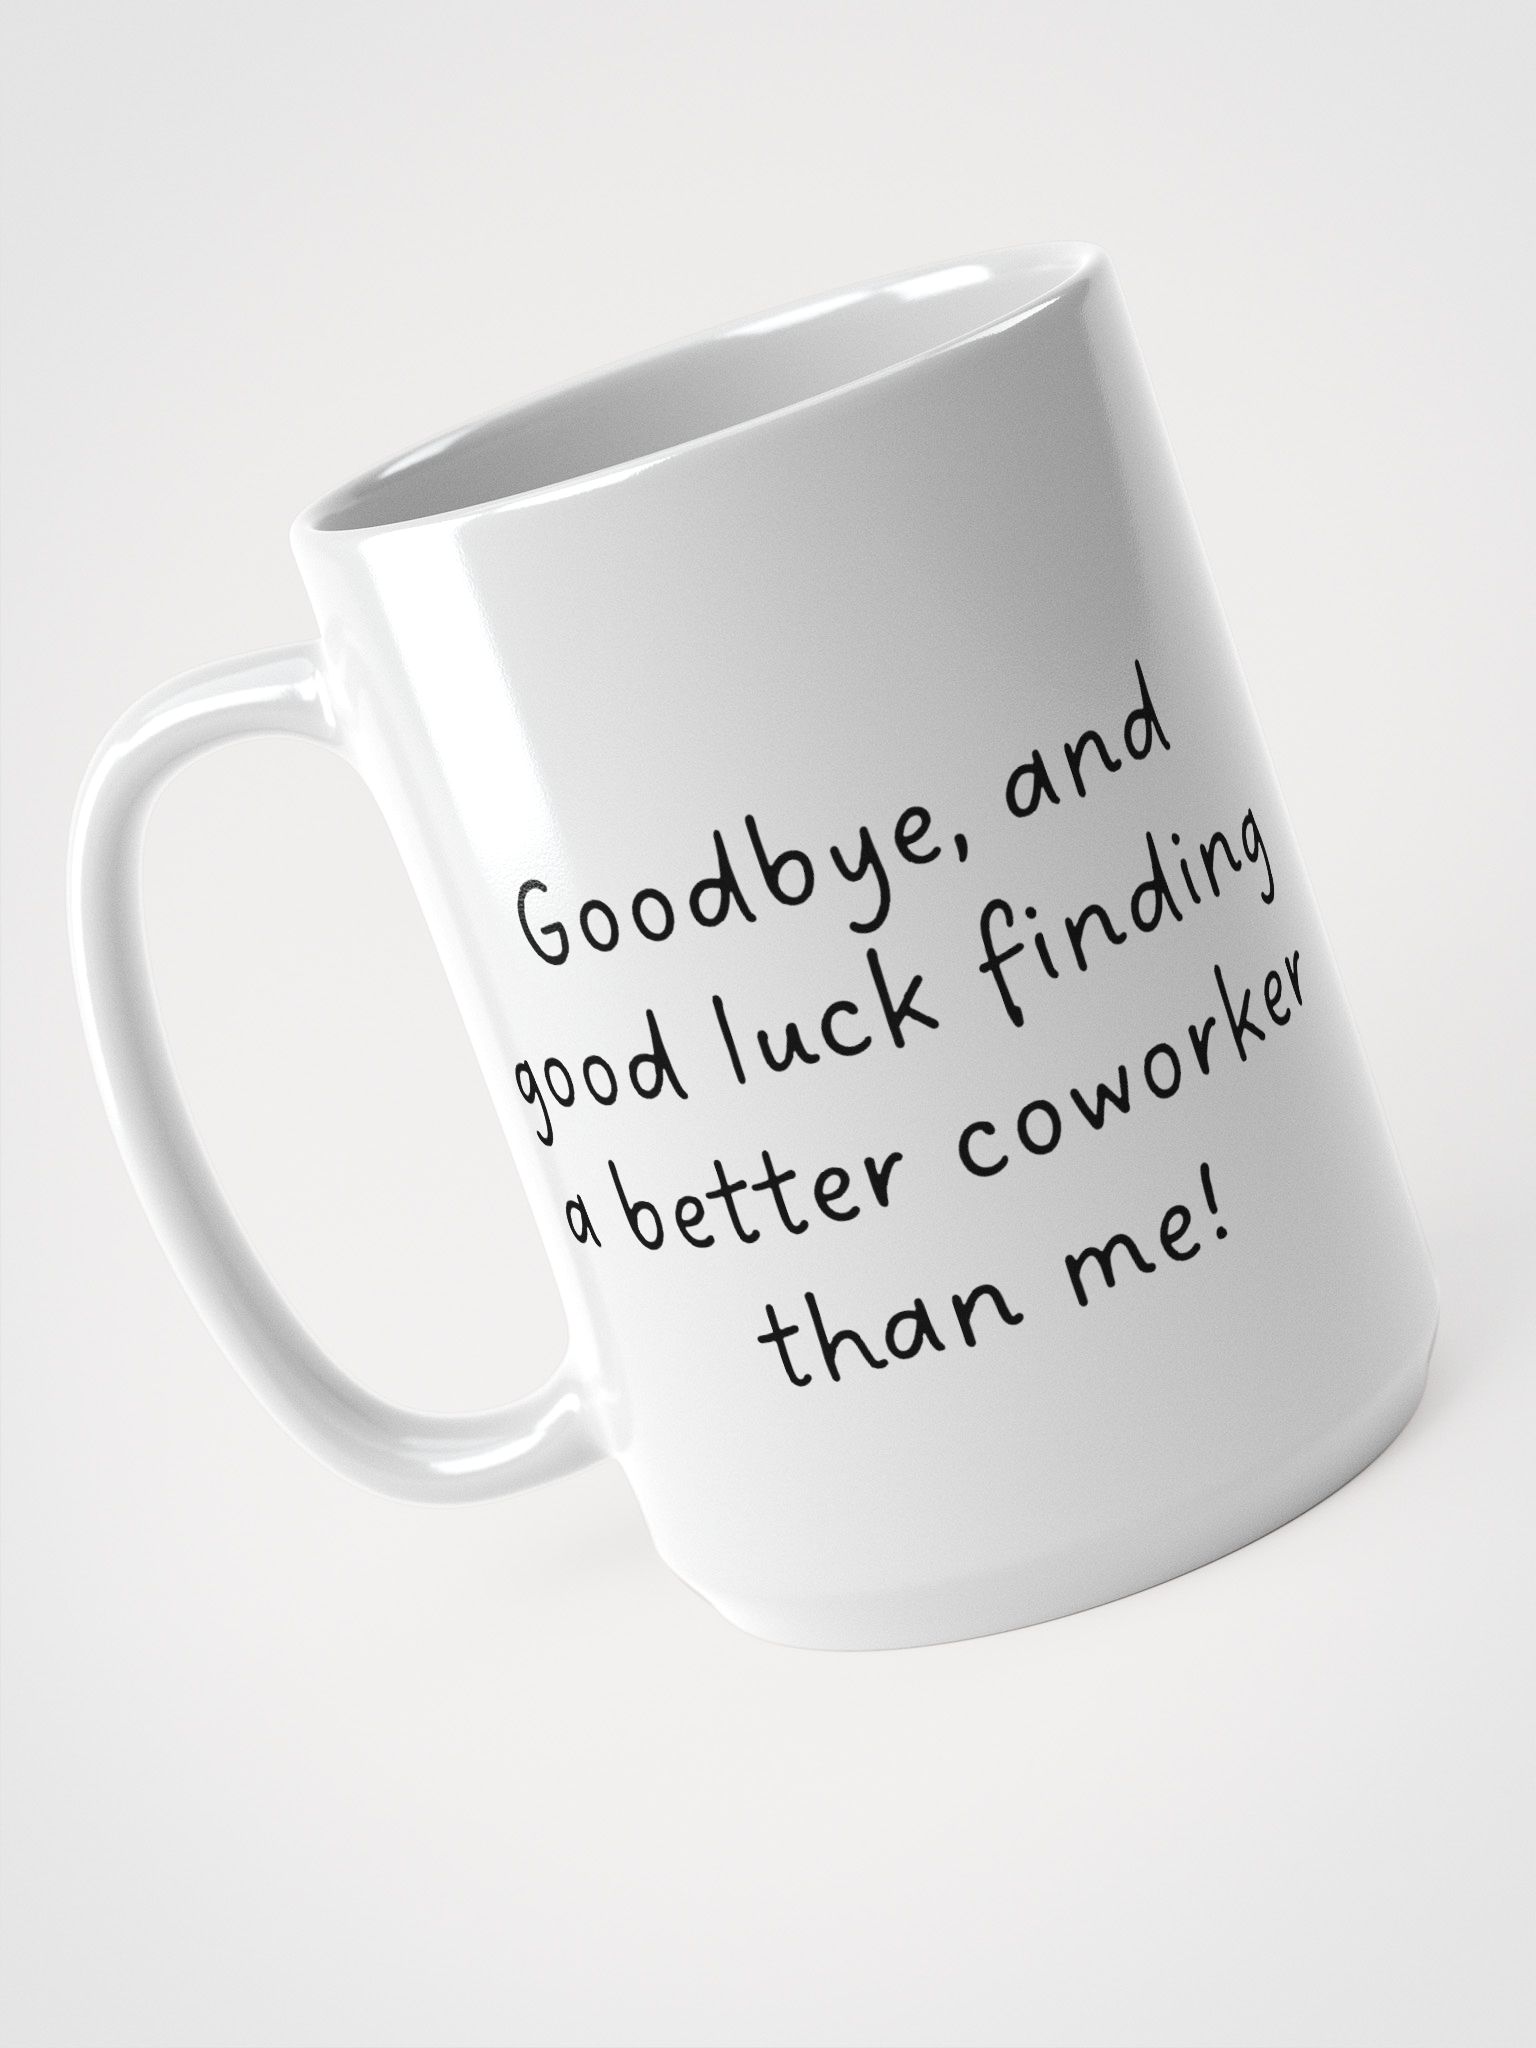 Lucky Man Lucky Woman coffee Mug Gift for Her Gift for 